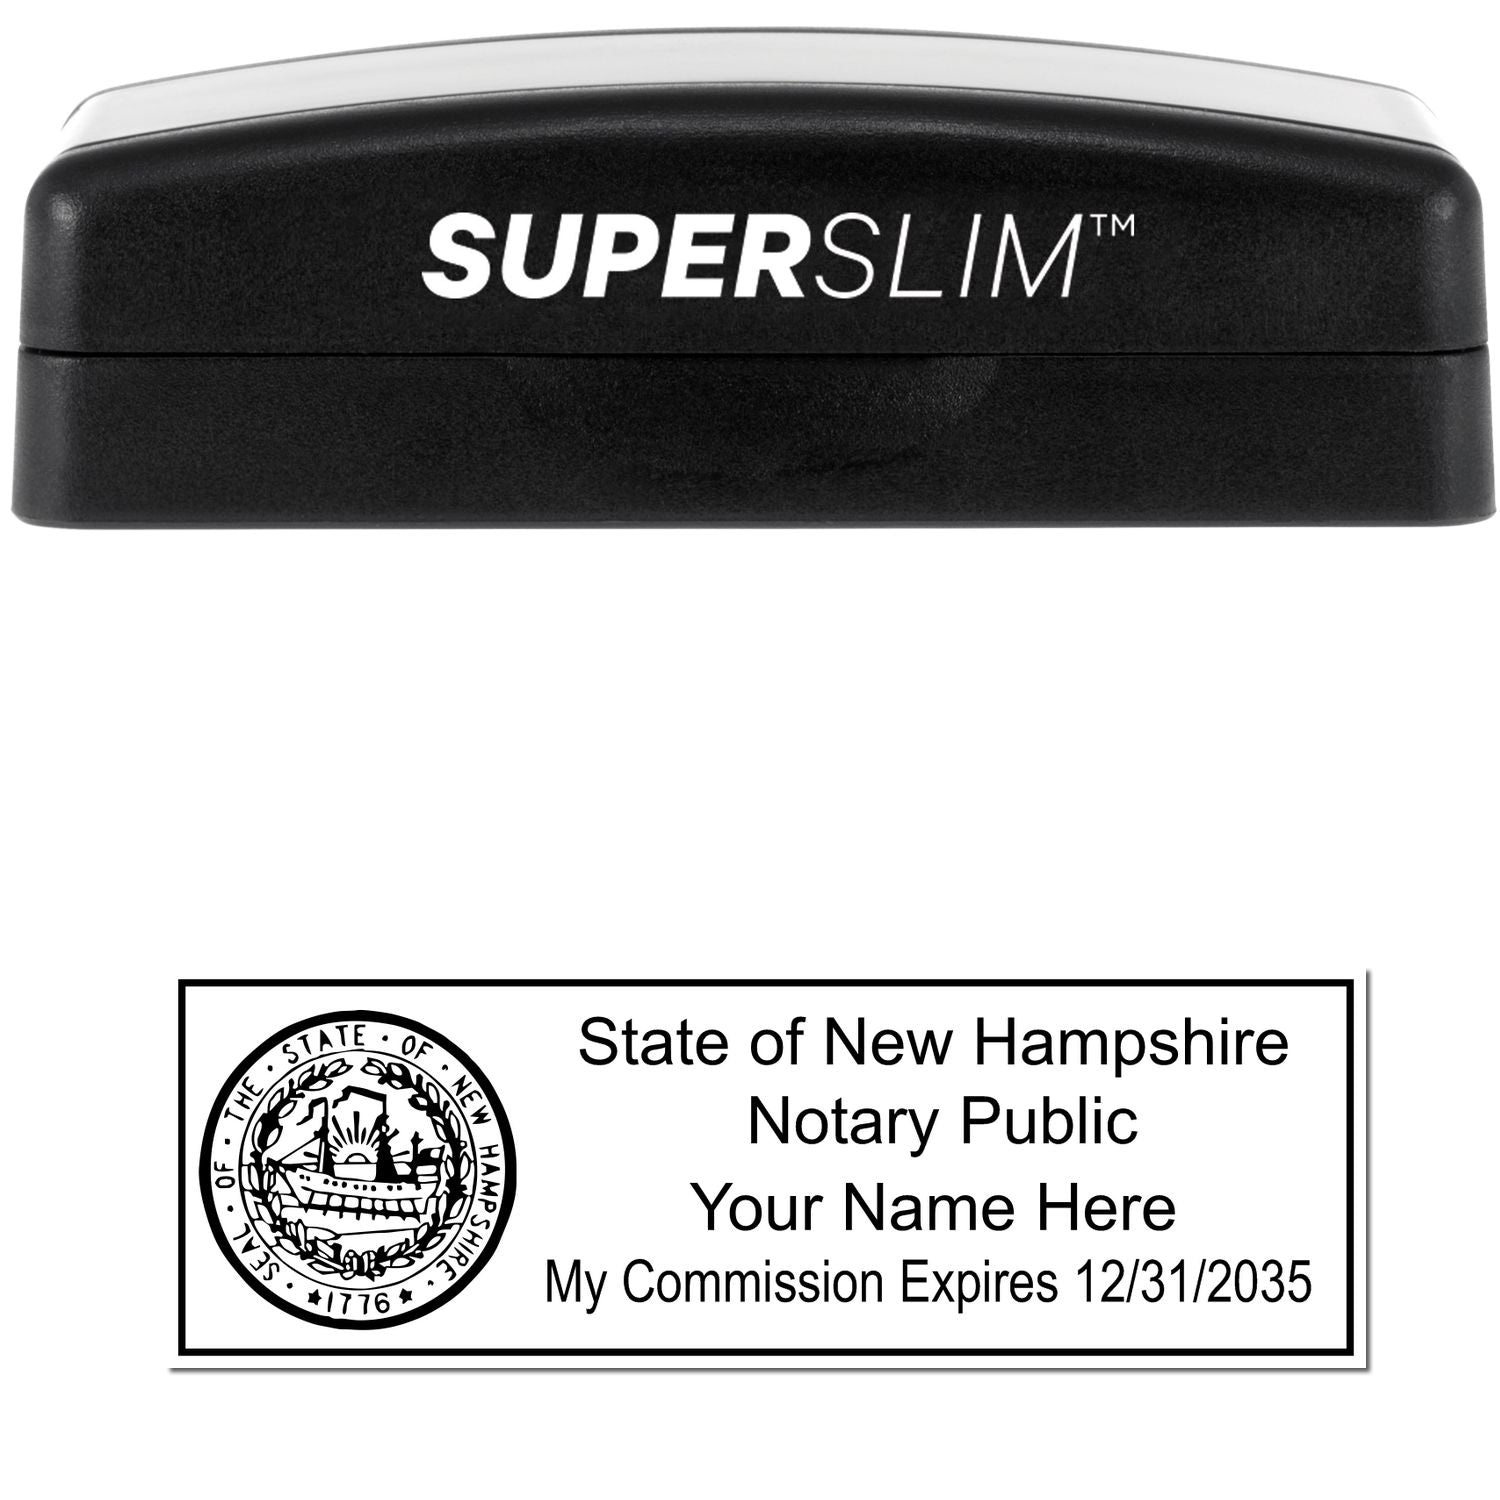 The main image for the Super Slim New Hampshire Notary Public Stamp depicting a sample of the imprint and electronic files